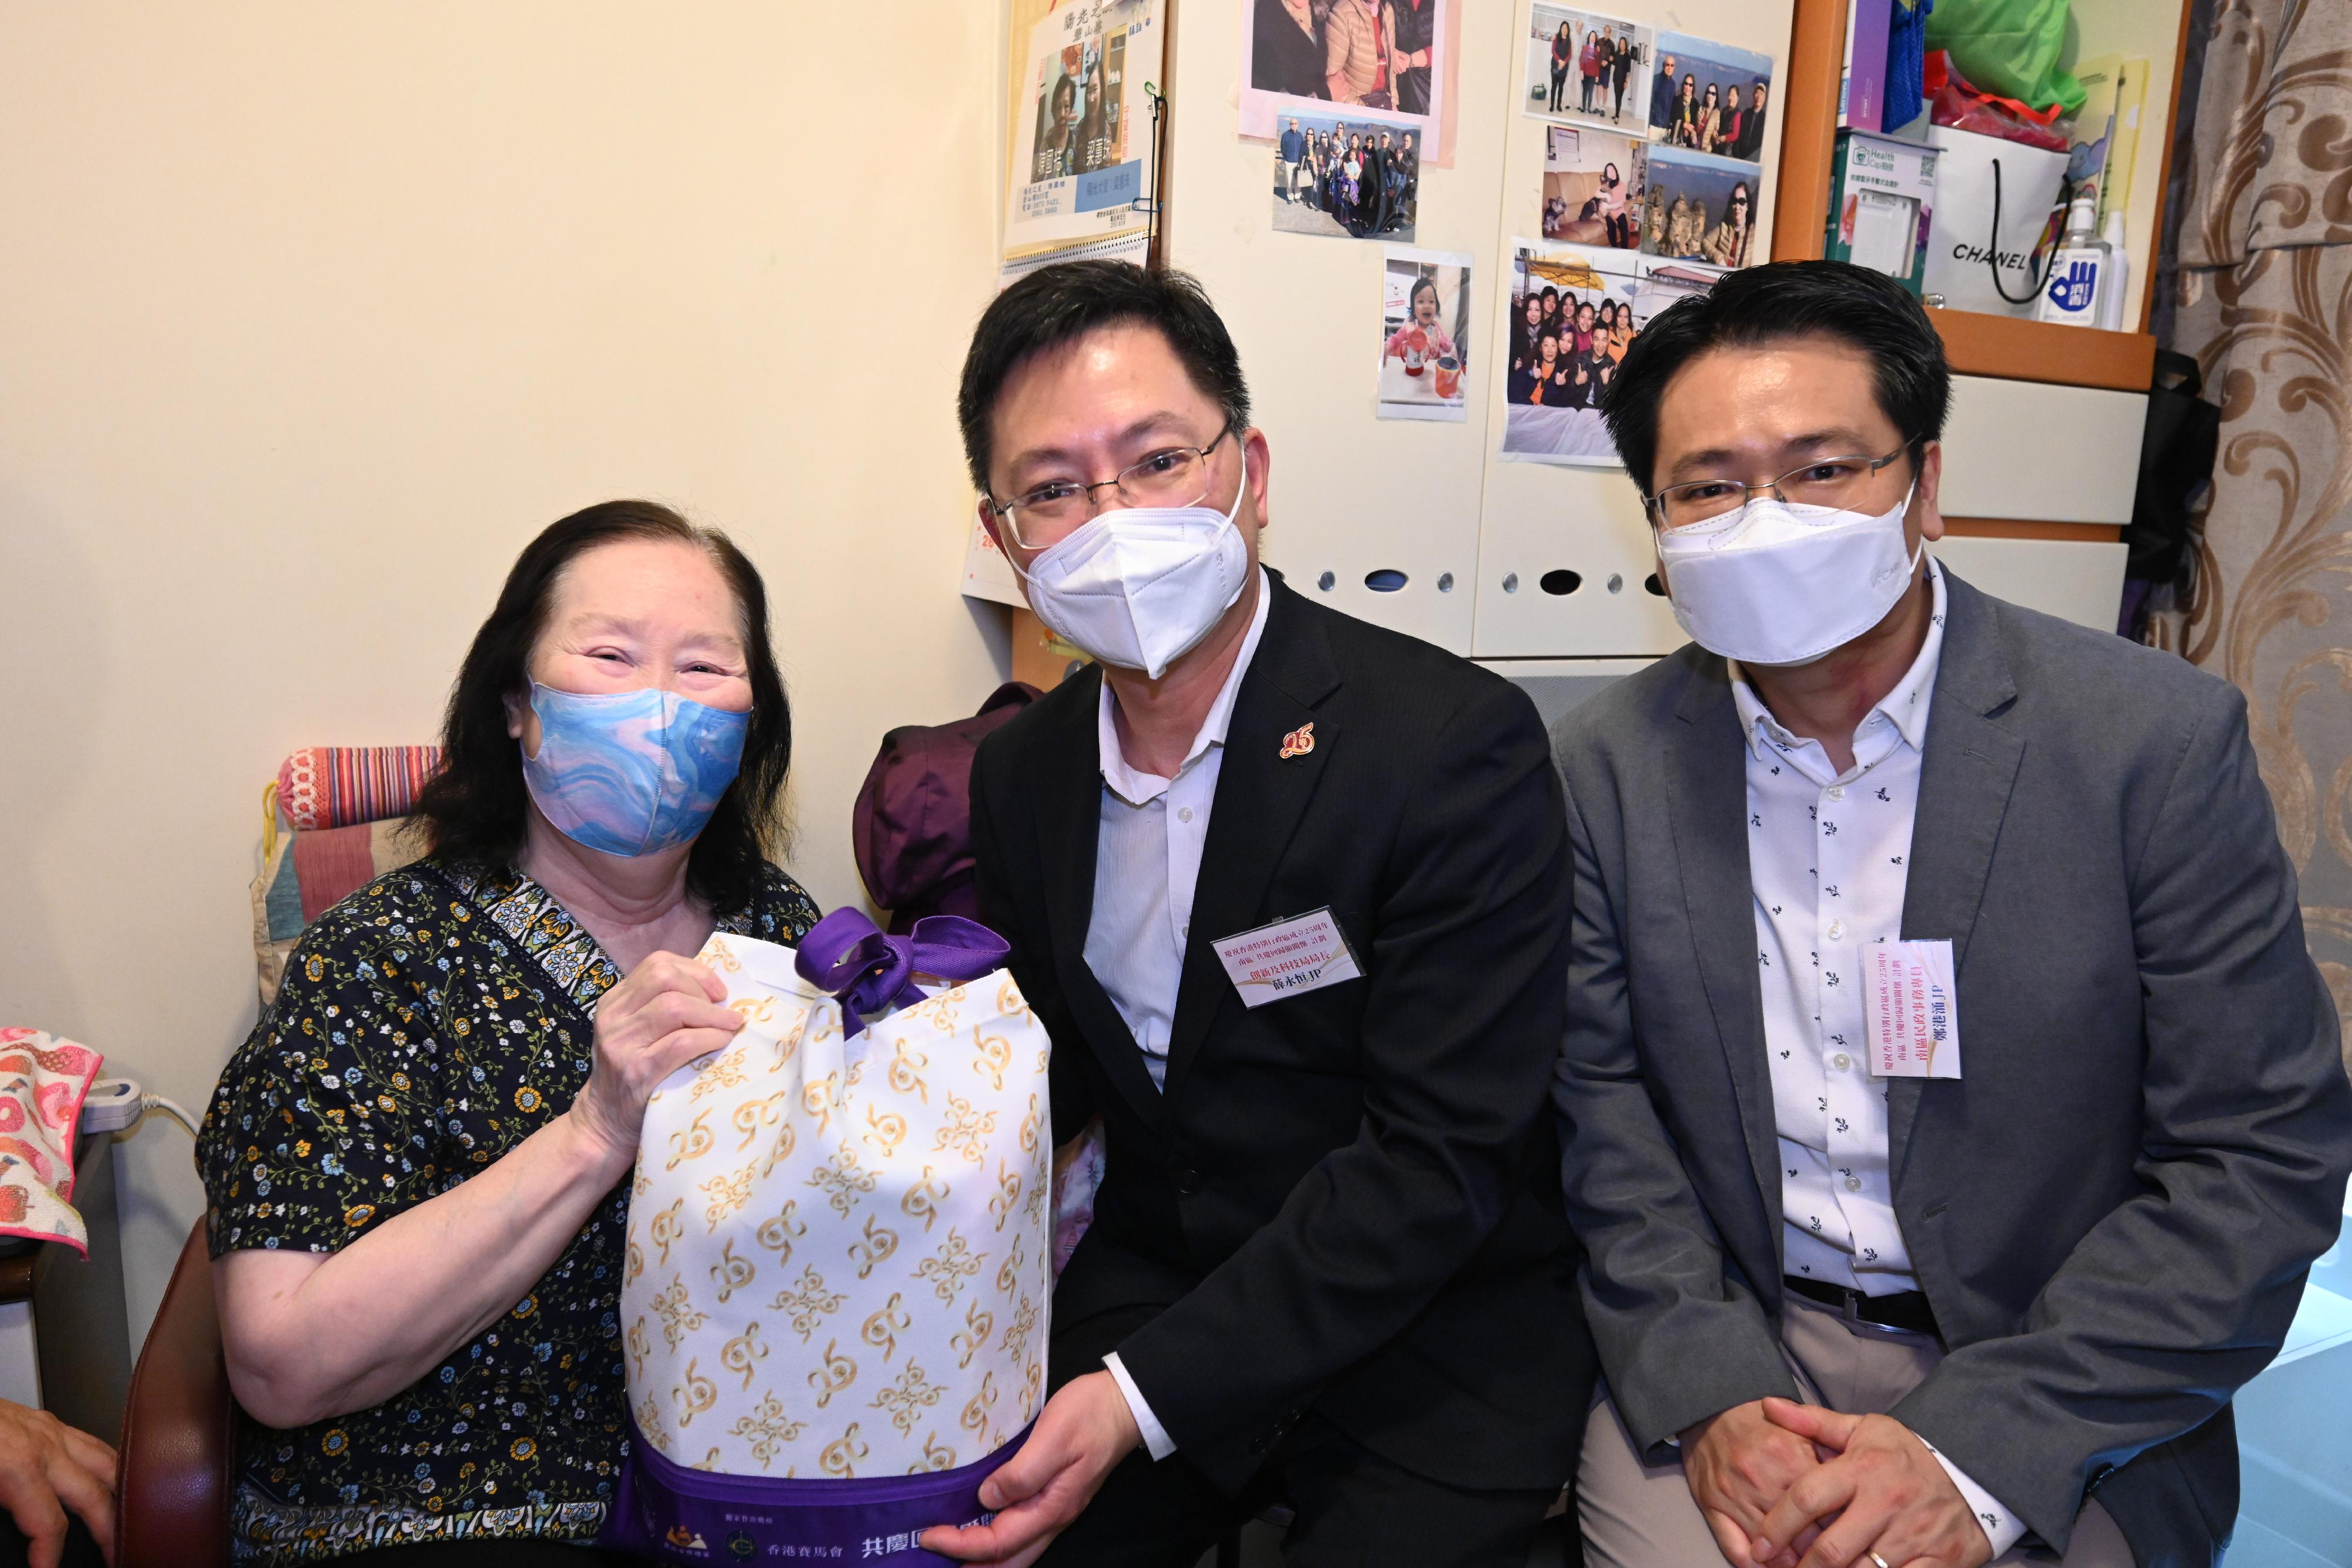 The Secretary for Innovation and Technology, Mr Alfred Sit (centre), gives out a gift pack in celebration of the 25th anniversary of the establishment of the Hong Kong Special Administrative Region to an elderly lady living alone in Shek Pai Wan Estate today (June 16). Looking on is the District Officer (Southern), Mr Francis Cheng (right).